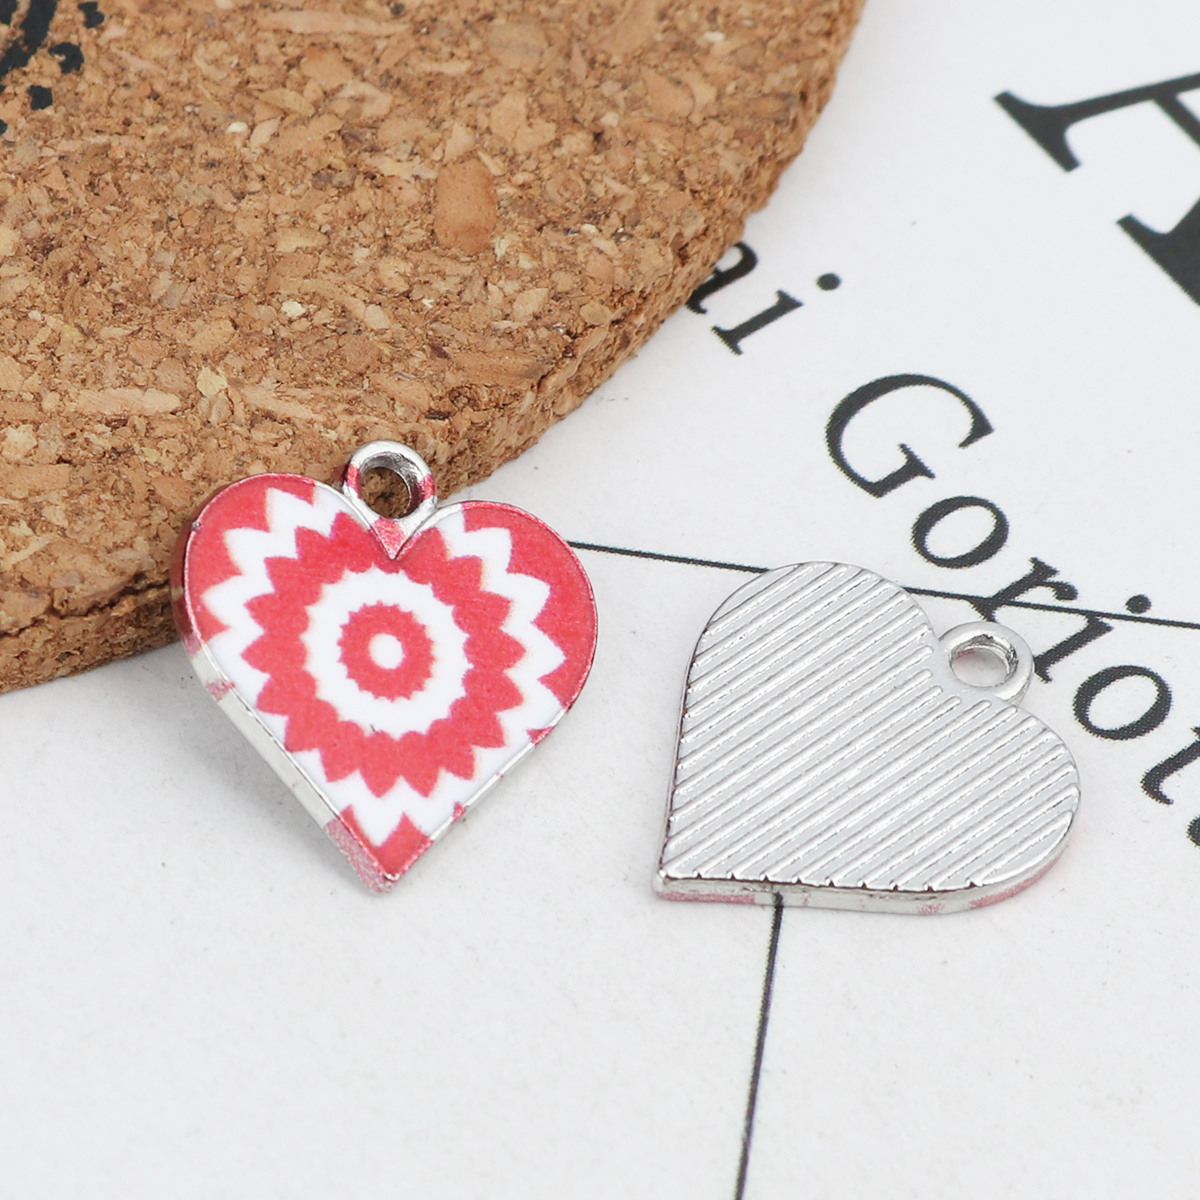 Picture of Zinc Based Alloy & Glass Charms Heart Silver Tone White & Red 17mm x 16mm, 10 PCs